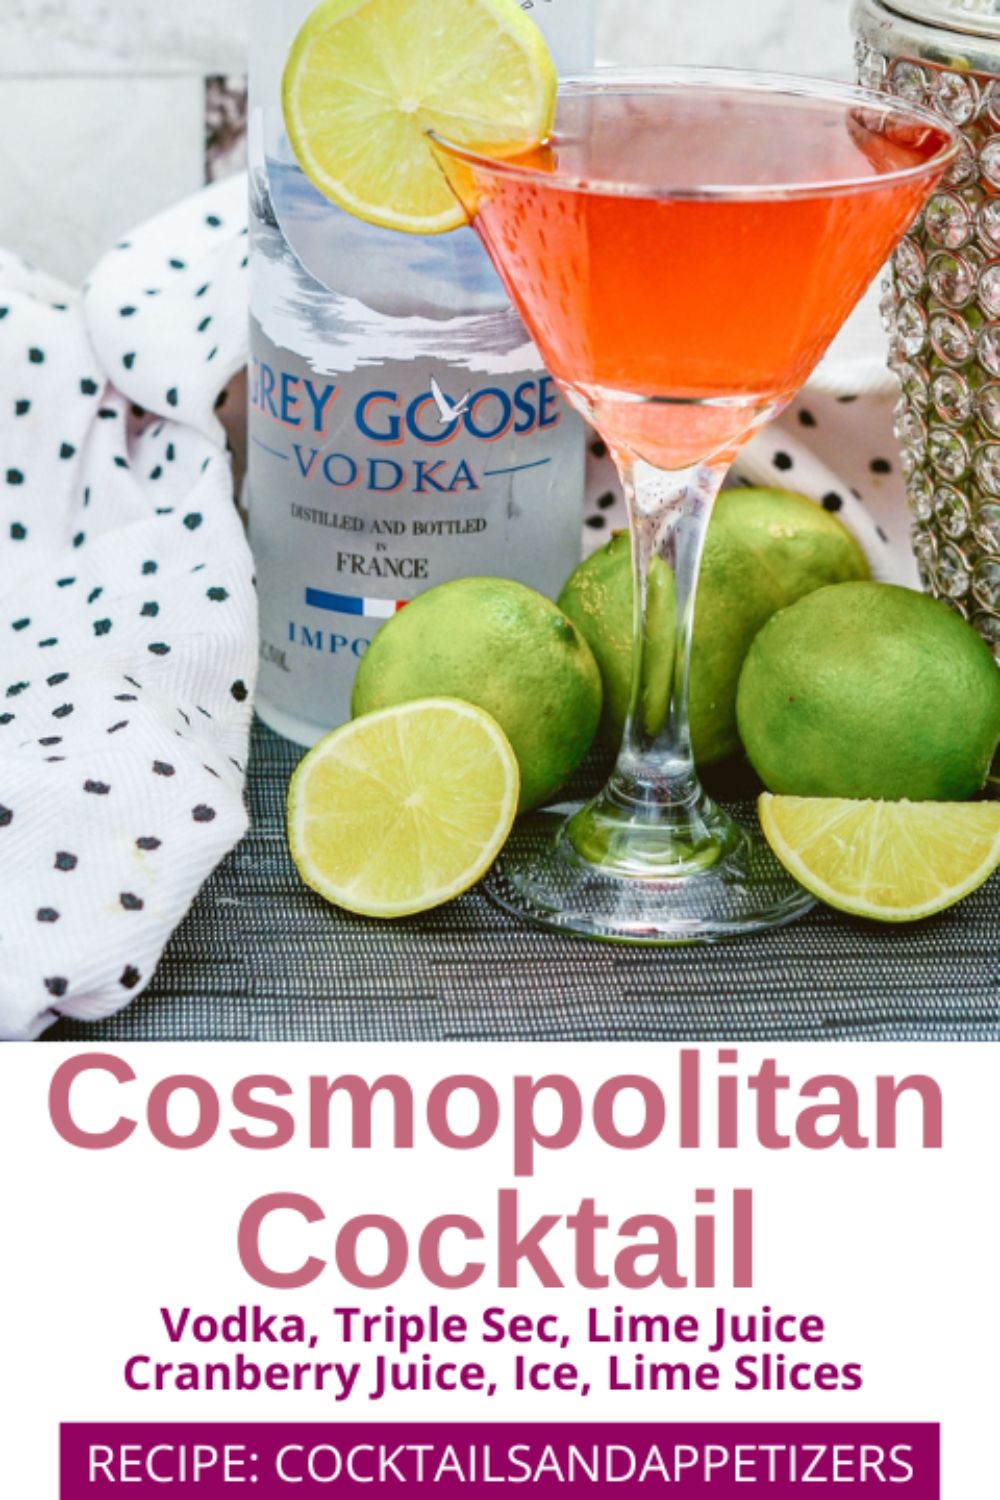 Cosmopolitan cocktail in a martini glass with limes and a vodka bottle.